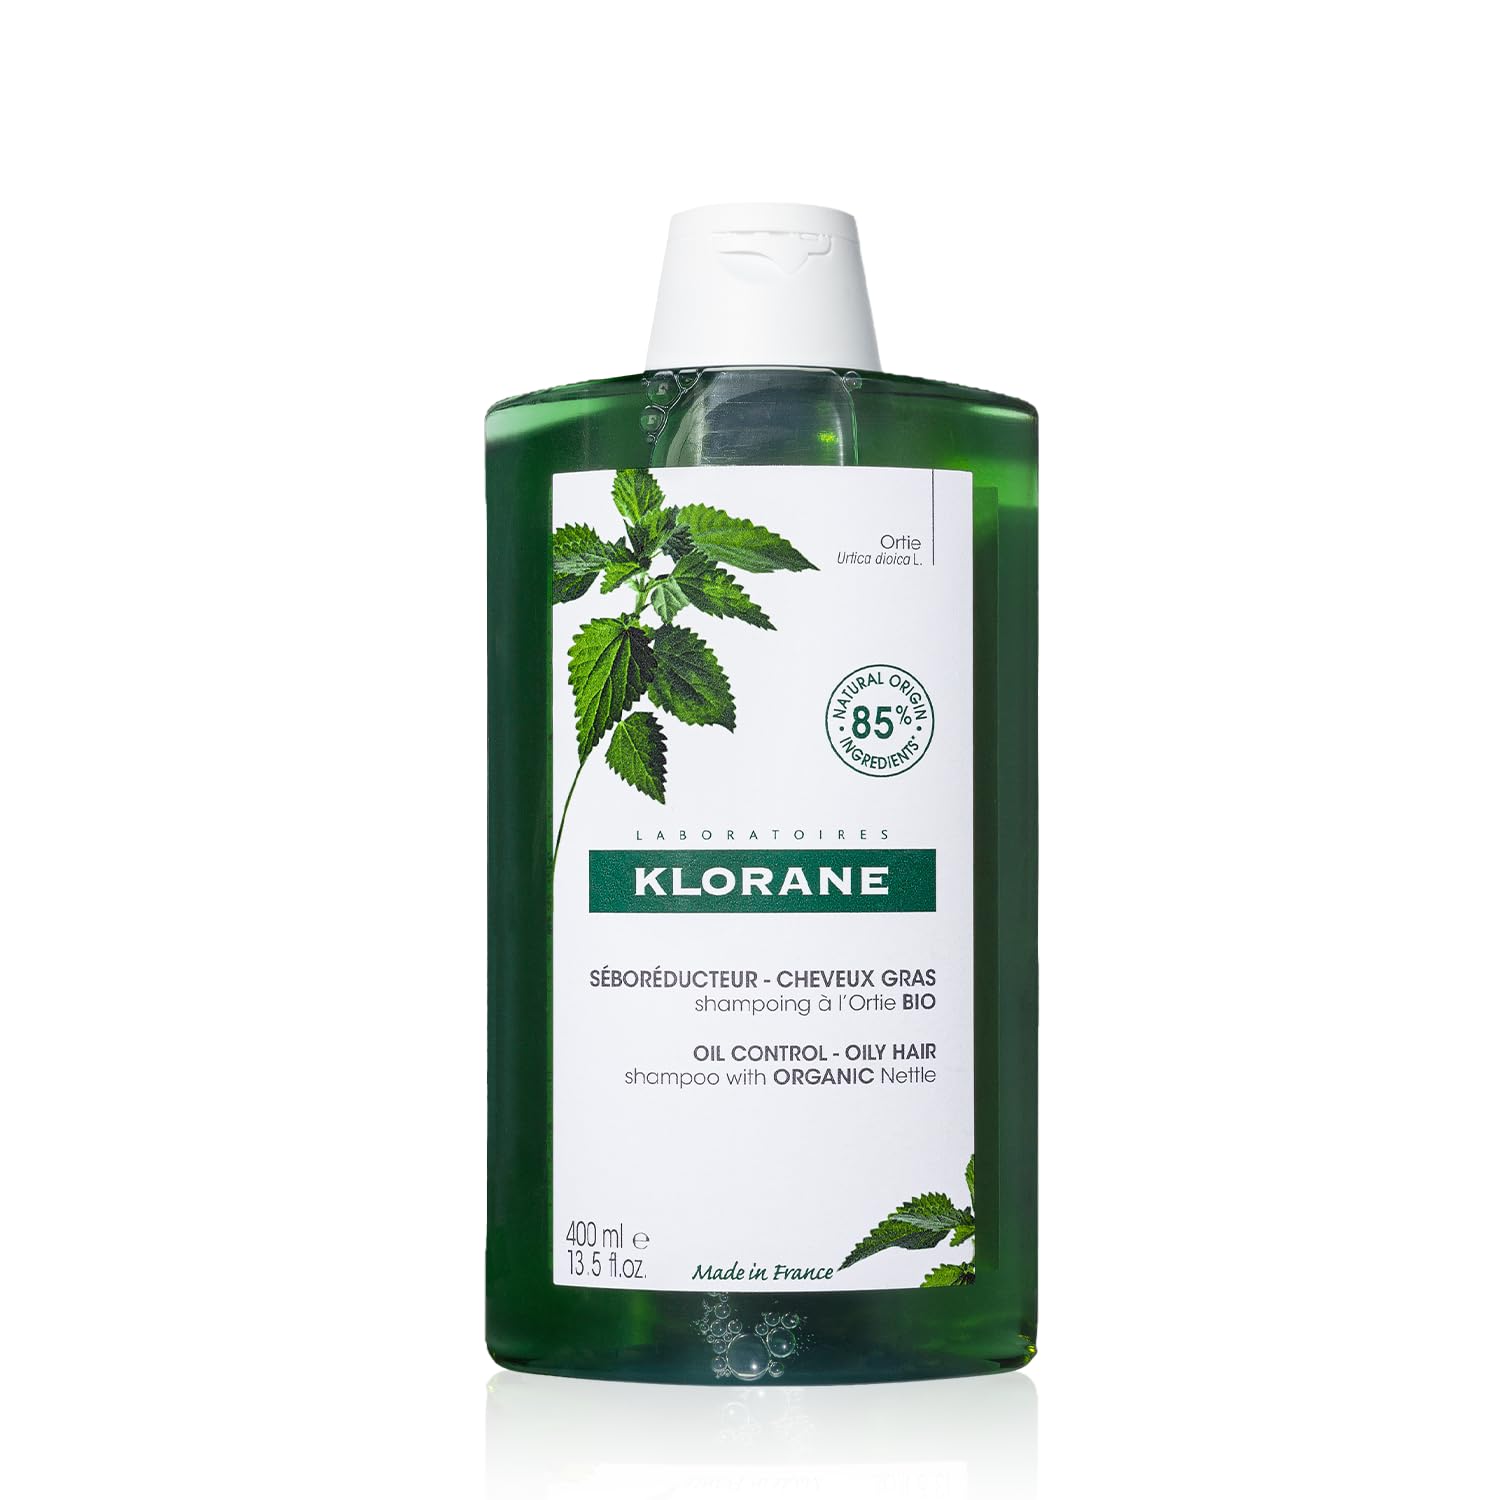 Klorane Shampoo with Nettle for Oily Hair and Scalp, Regulates Oil Production, Paraben, Silicone, SLS Free, 13.53 Fl Oz (Pack of 1)